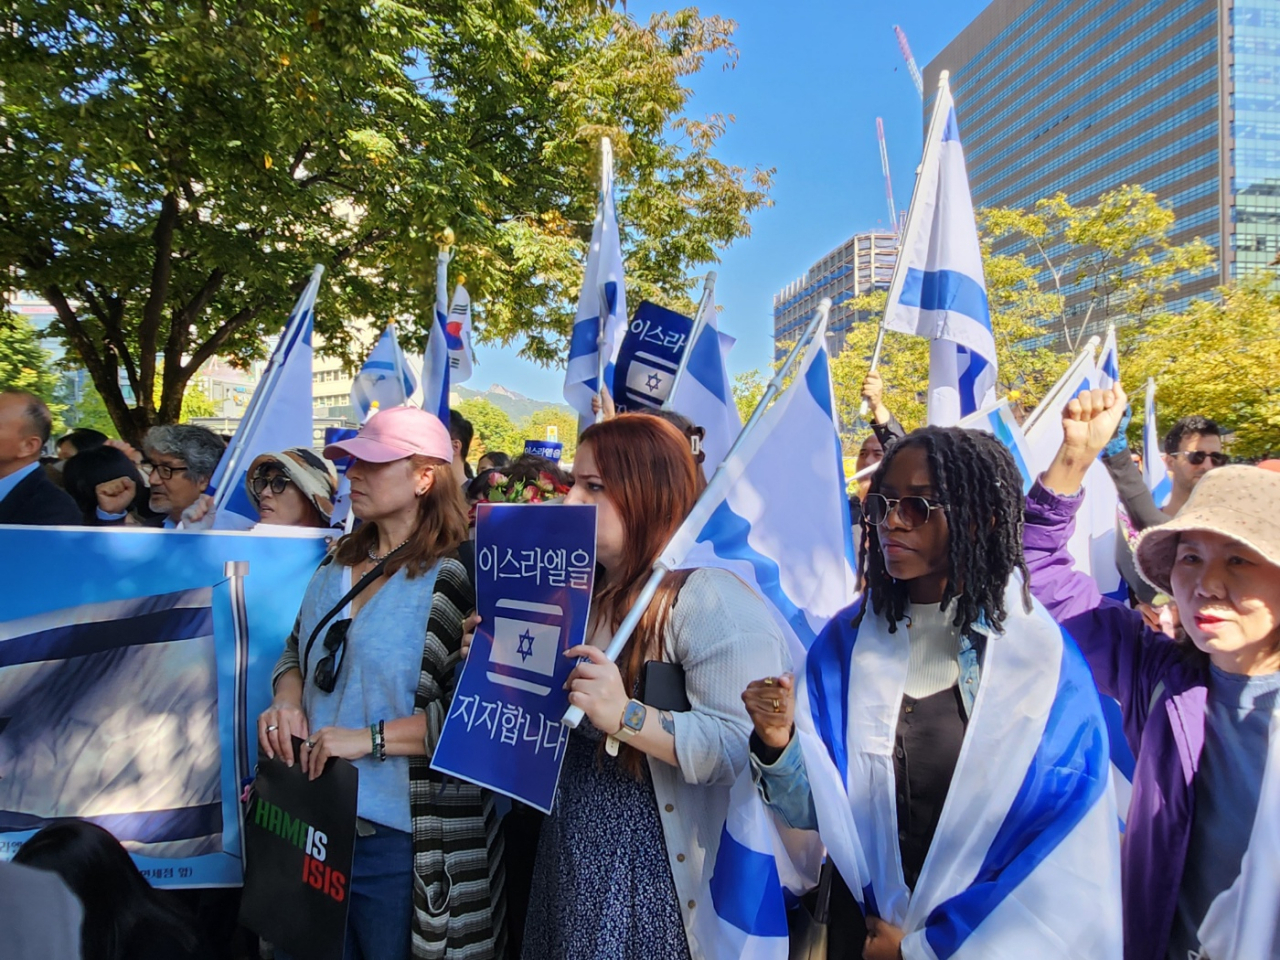 Liz (second from right), an Israeli student in Korea, participates in the Solidarity with Israel rally along with other Israelis and Koreans, in Seoul, Tuesday. (Lee Jung-youn/The Korea Herald)